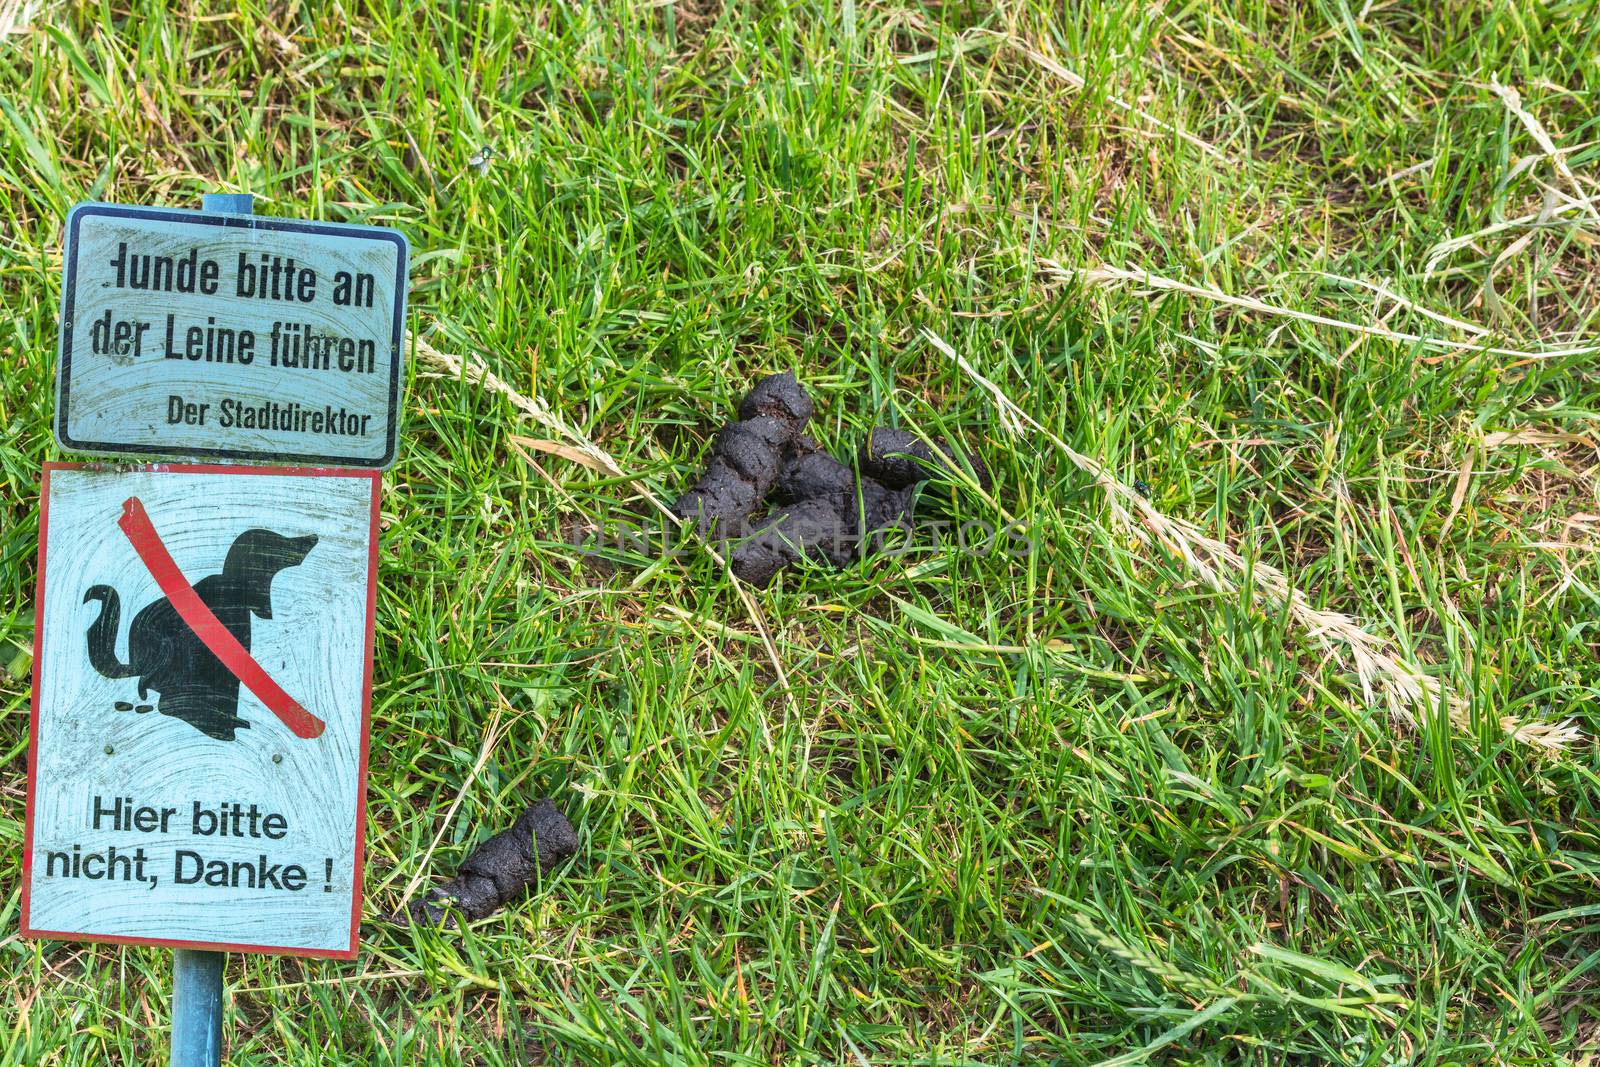 Dog droppings on grass by JFsPic